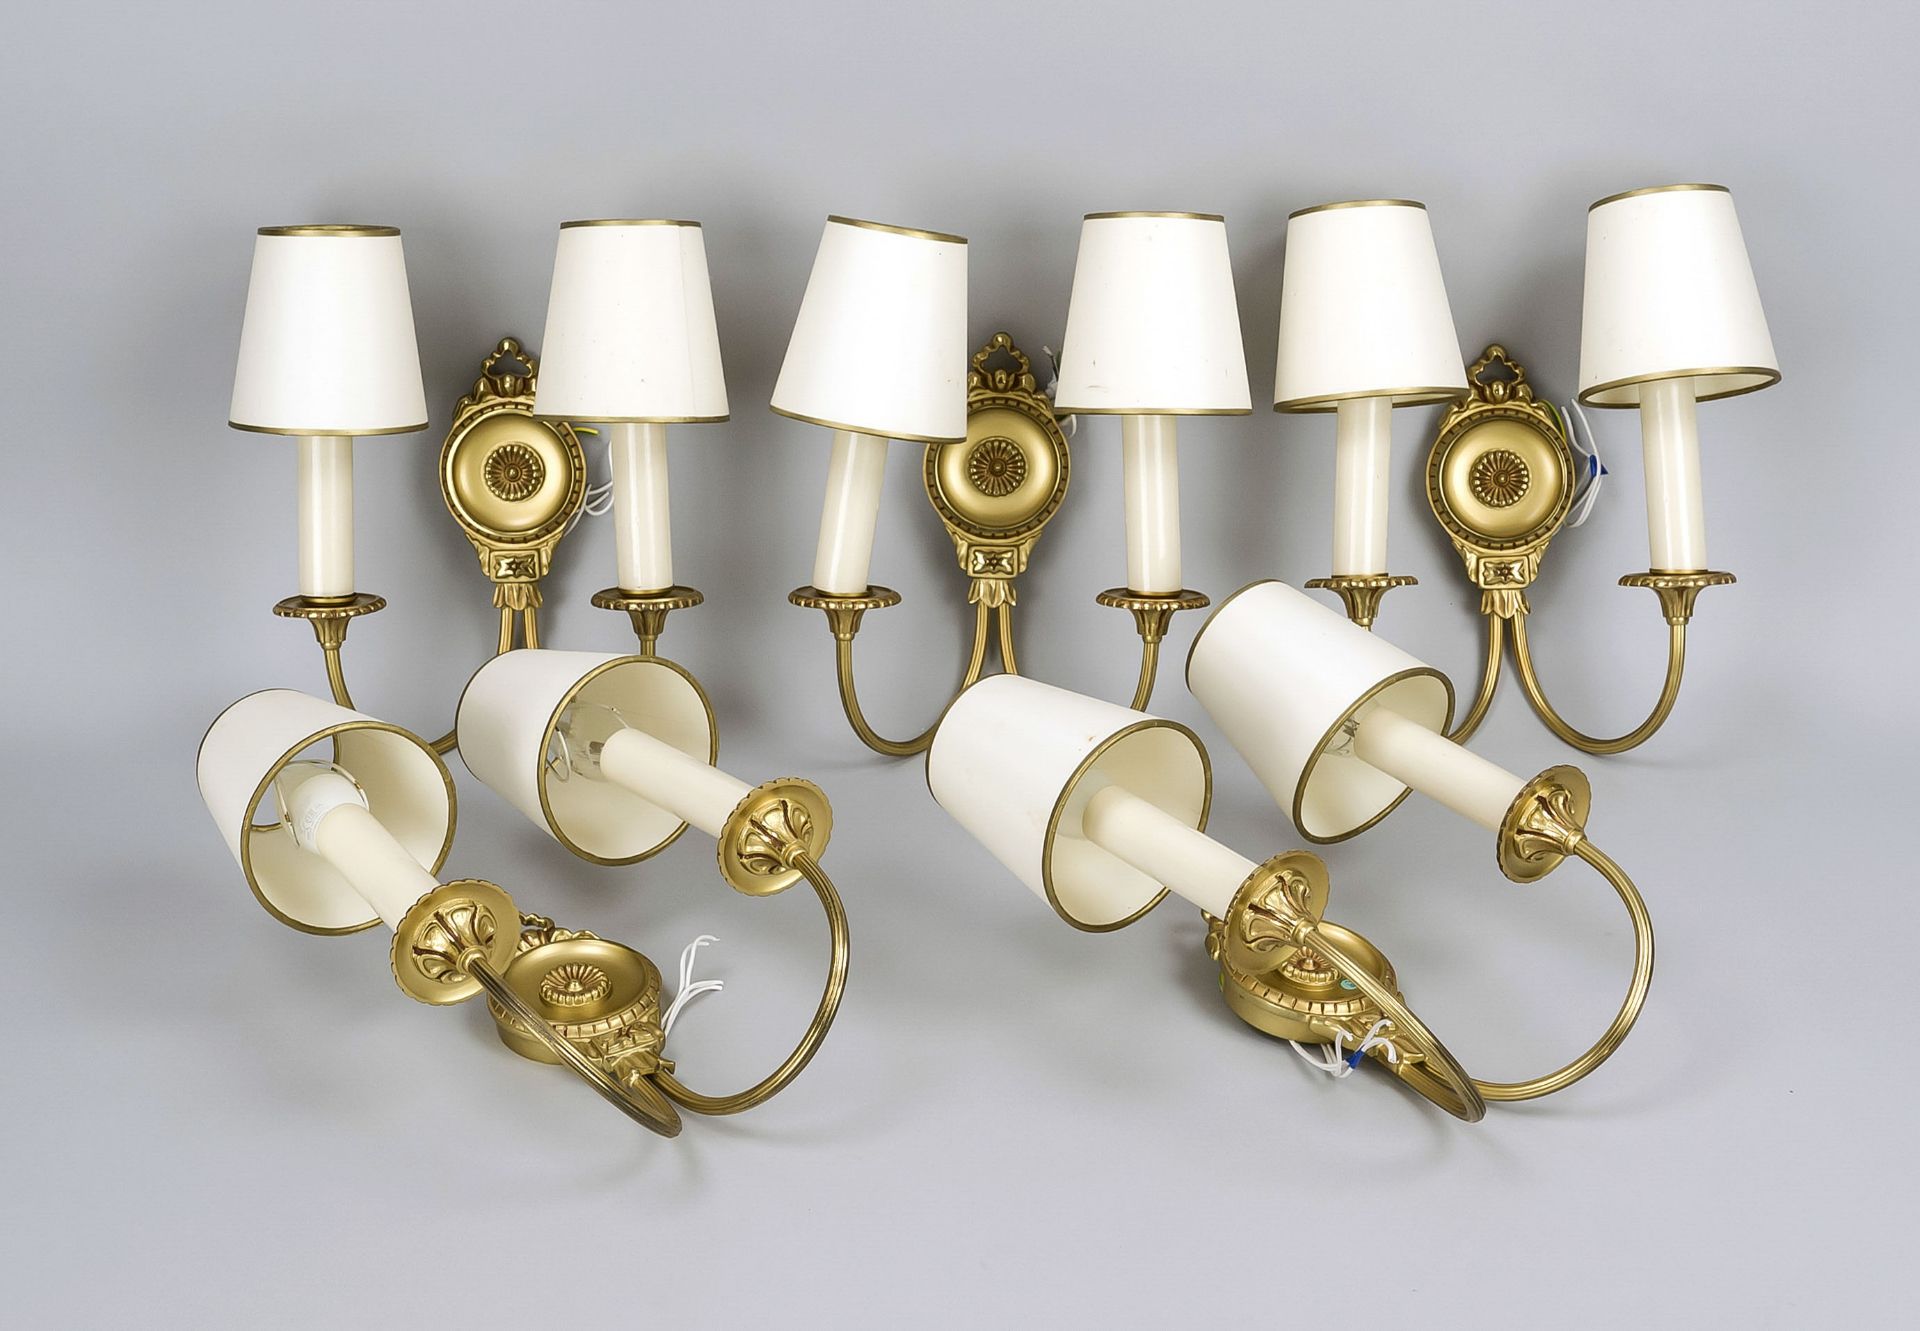 Set of 5 wall lamps in classicist style, 20th century, partly matted brass, h. 30 cm